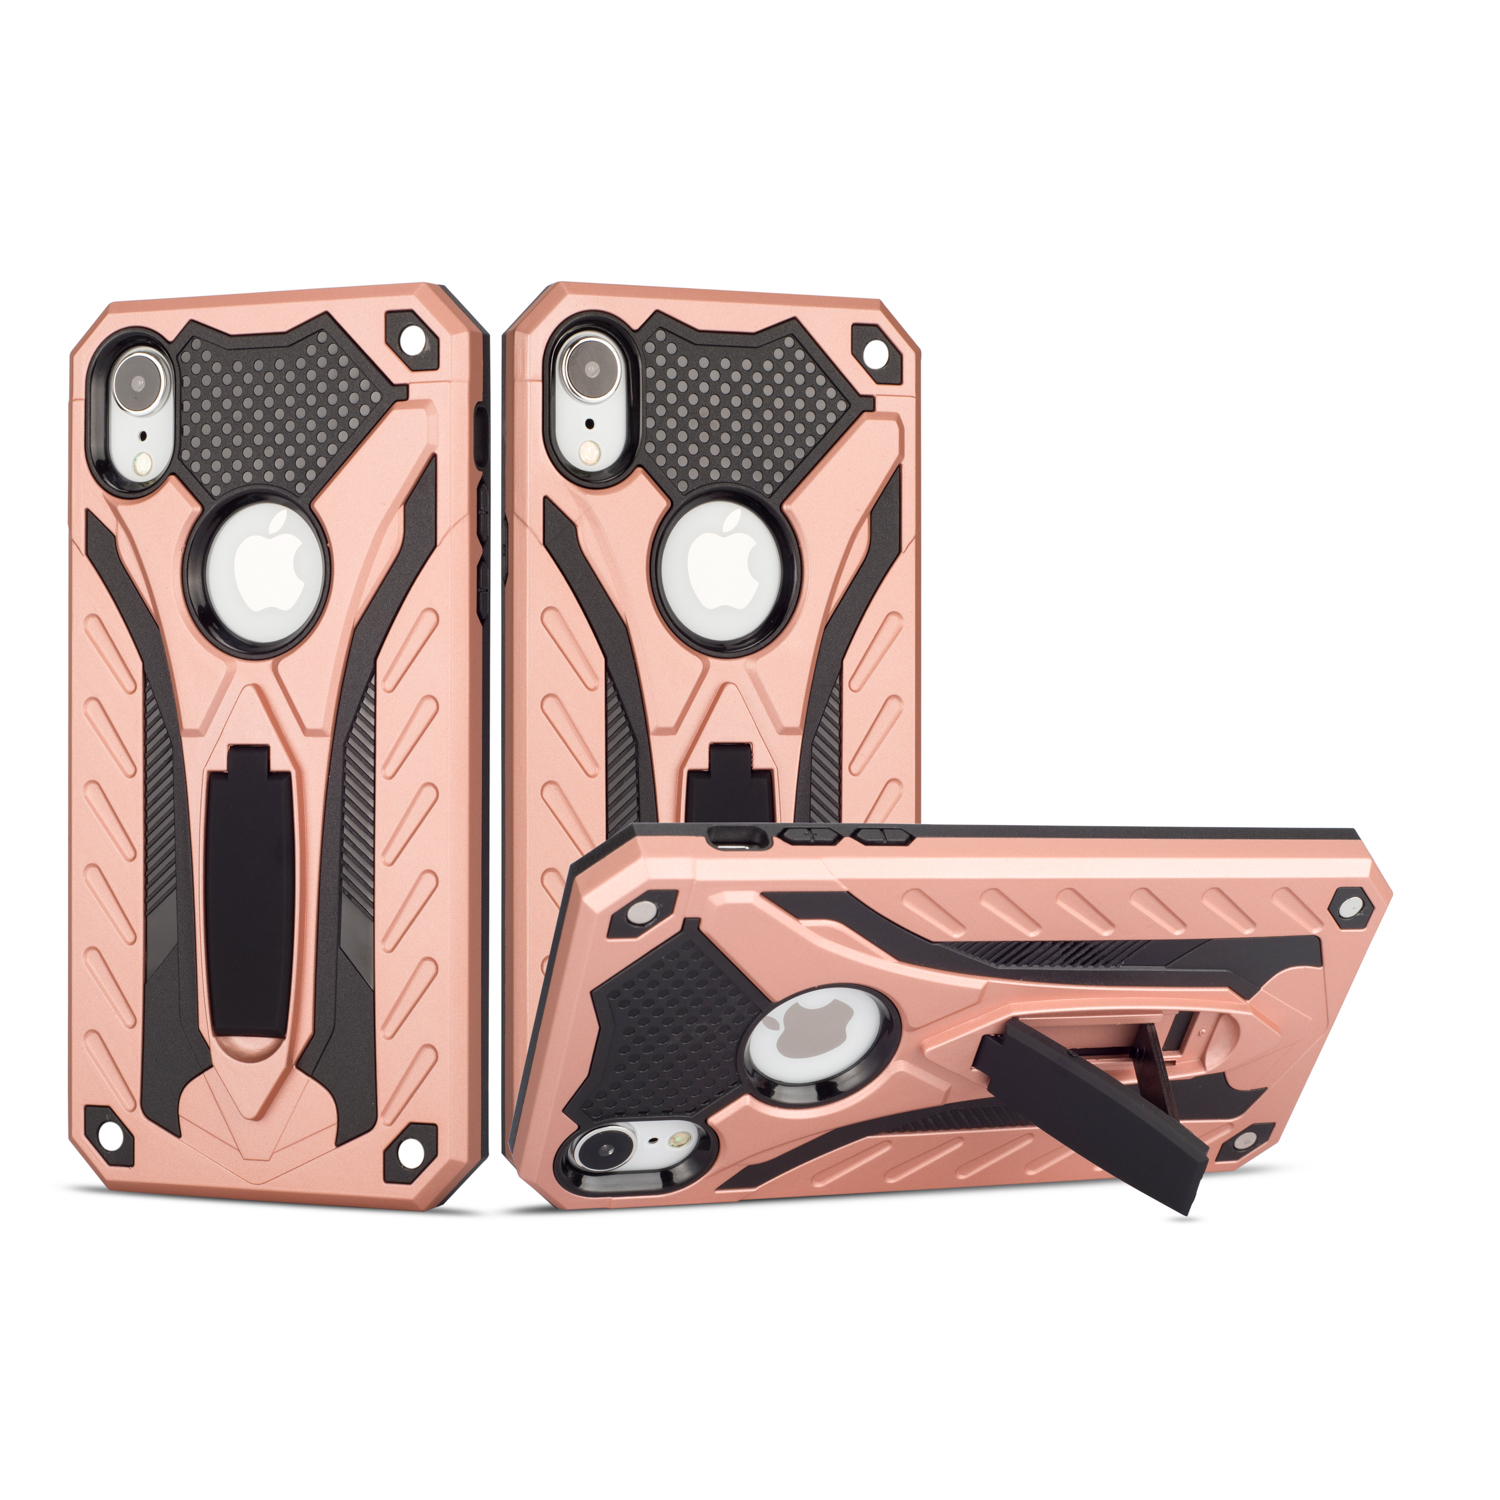 iPhone Xr 6.1in Armor Knight Kickstand Hybrid Case (Rose GOLD)